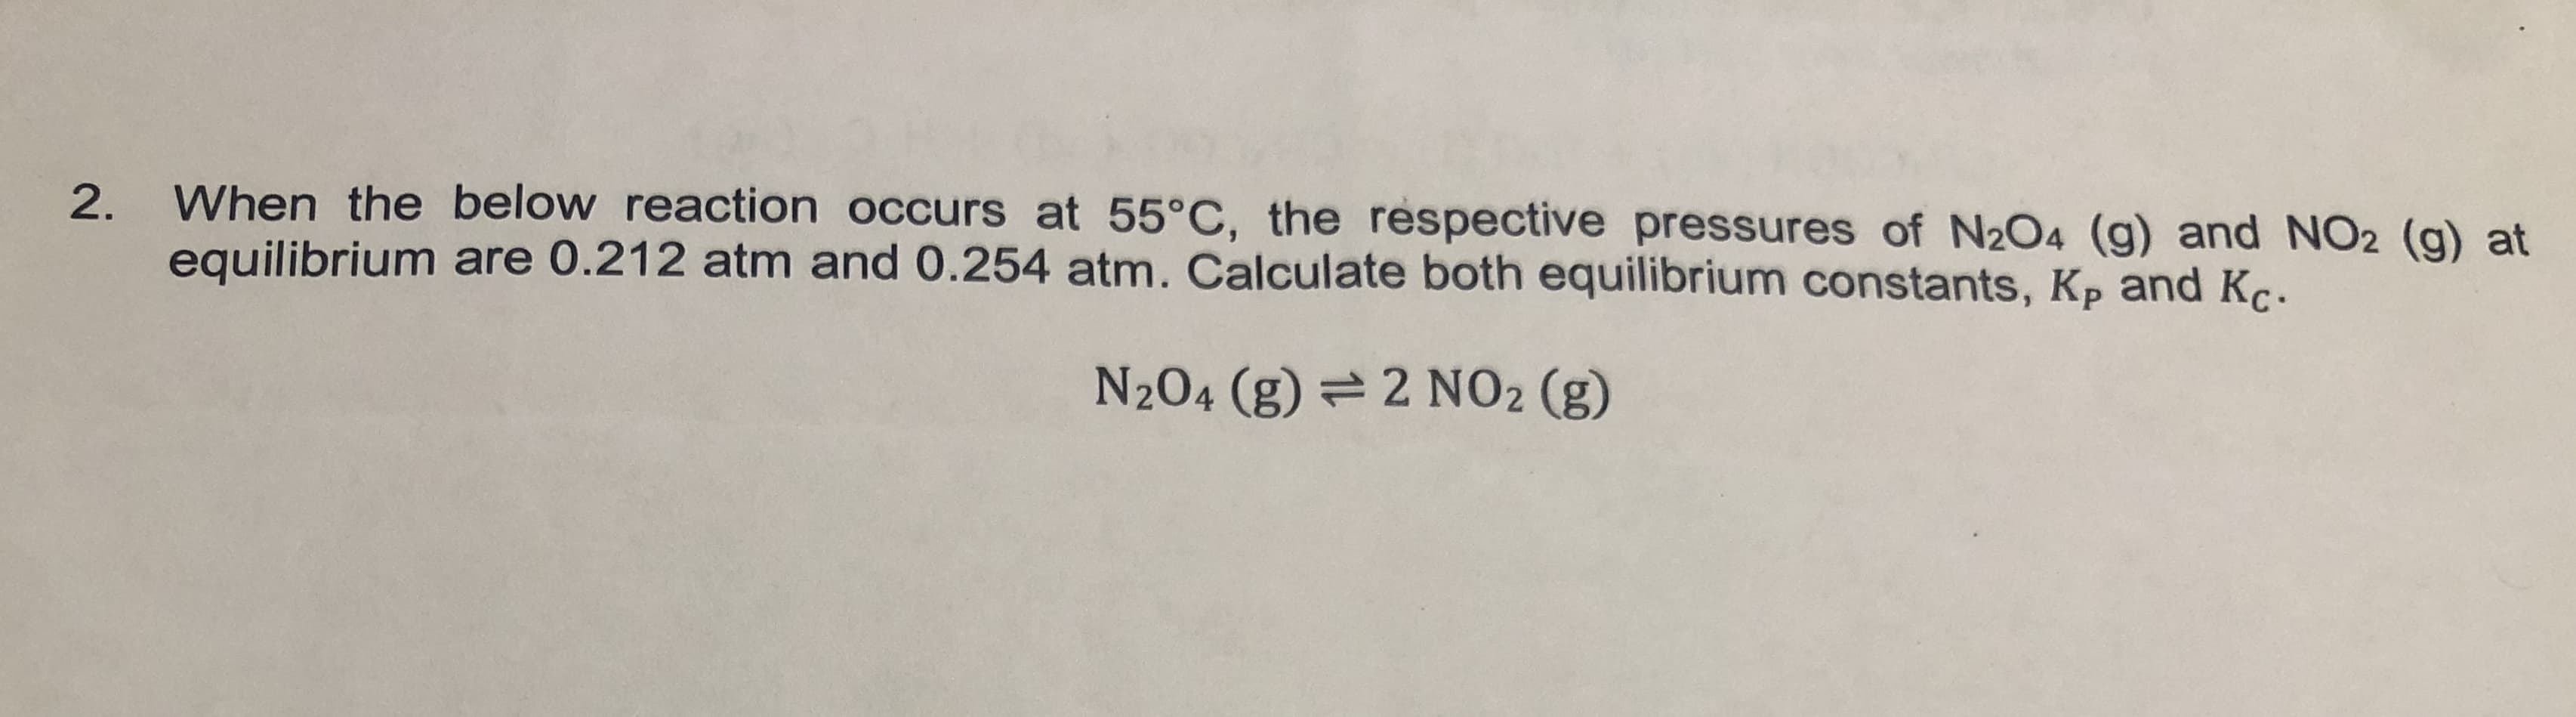 When the below reaction occurs at 55°C, the respective pressures of N2O4 (g) and NO2 (g) at
2.
equilibrium are 0.212 atm and 0.254 atm. Calculate both equilibrium constants, Kp and Kç
N2O4 (g)
2 NO2 (g)
